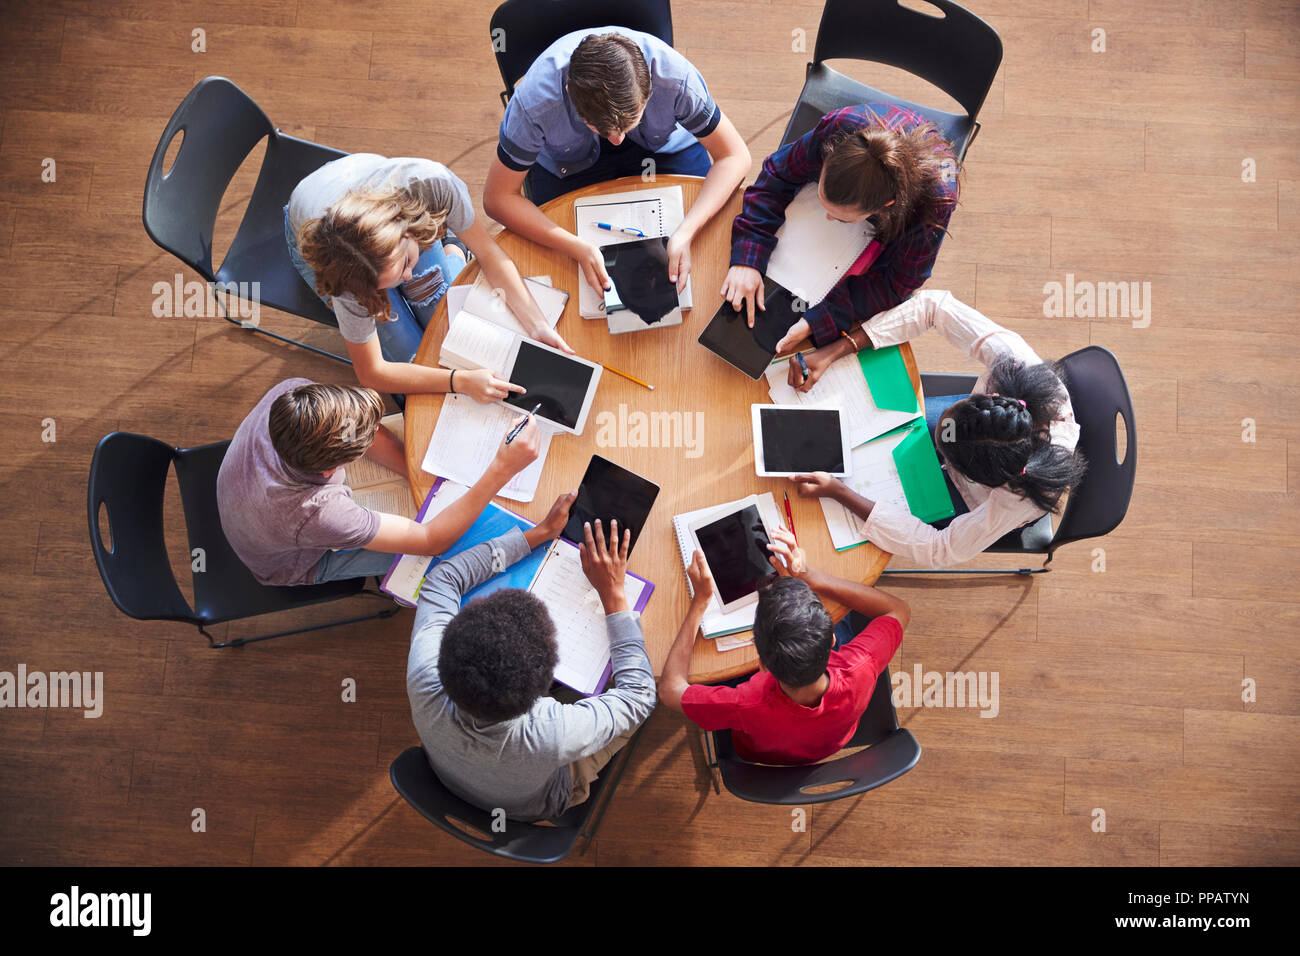 Overhead Shot Of High School Pupils Using Digital Tablets In Group Study Around Tables Stock Photo